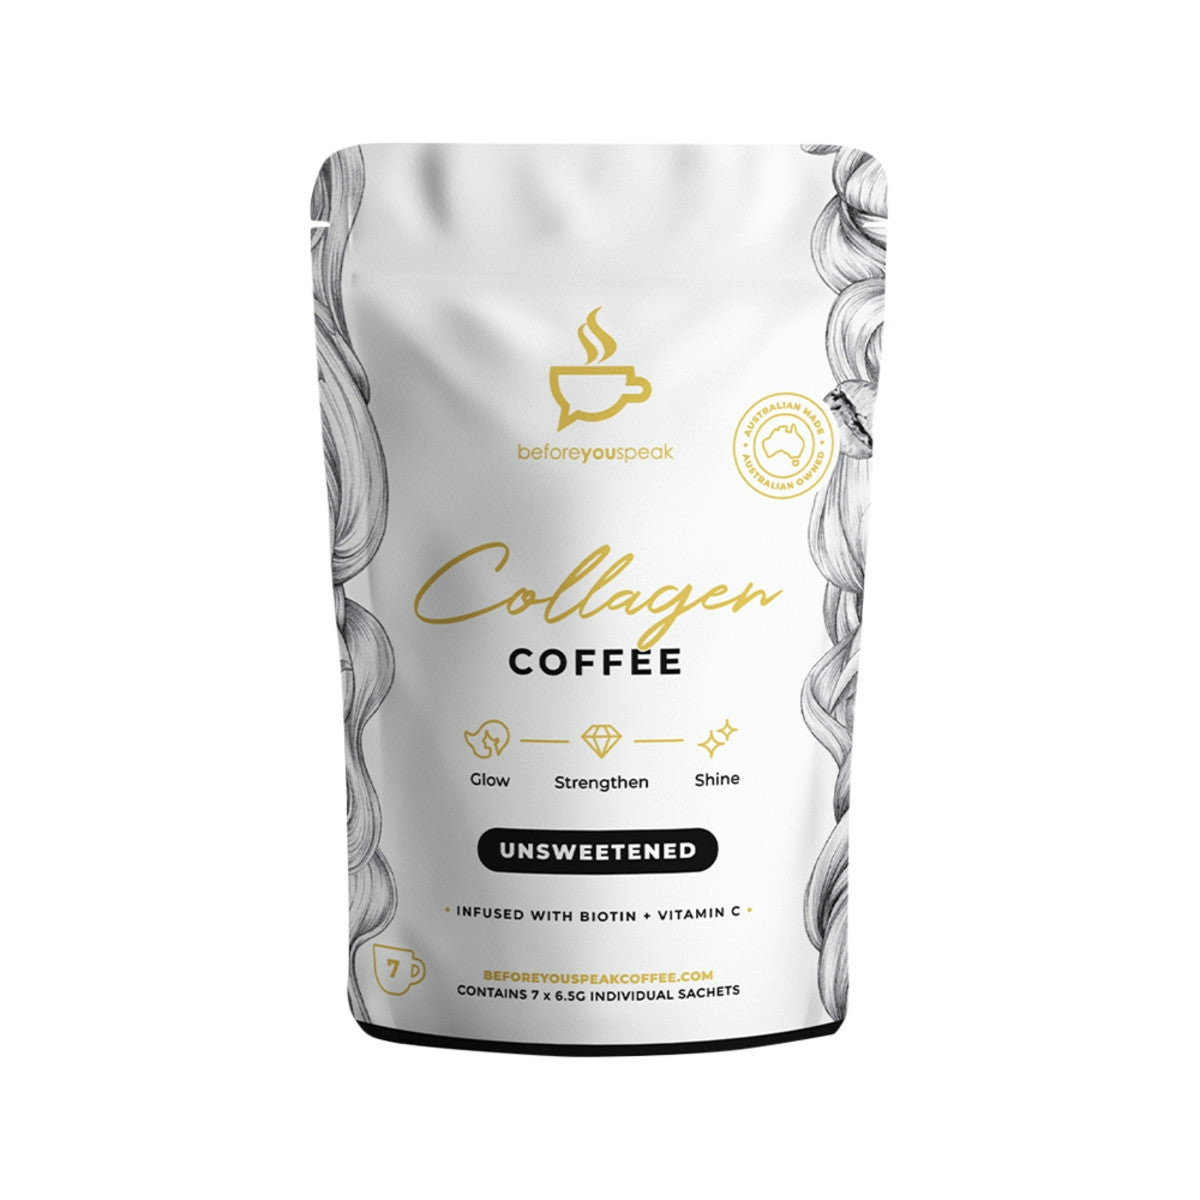 image of Before You Speak Collagen Coffee Unsweetened 6.5g x 7 Pack on white background 